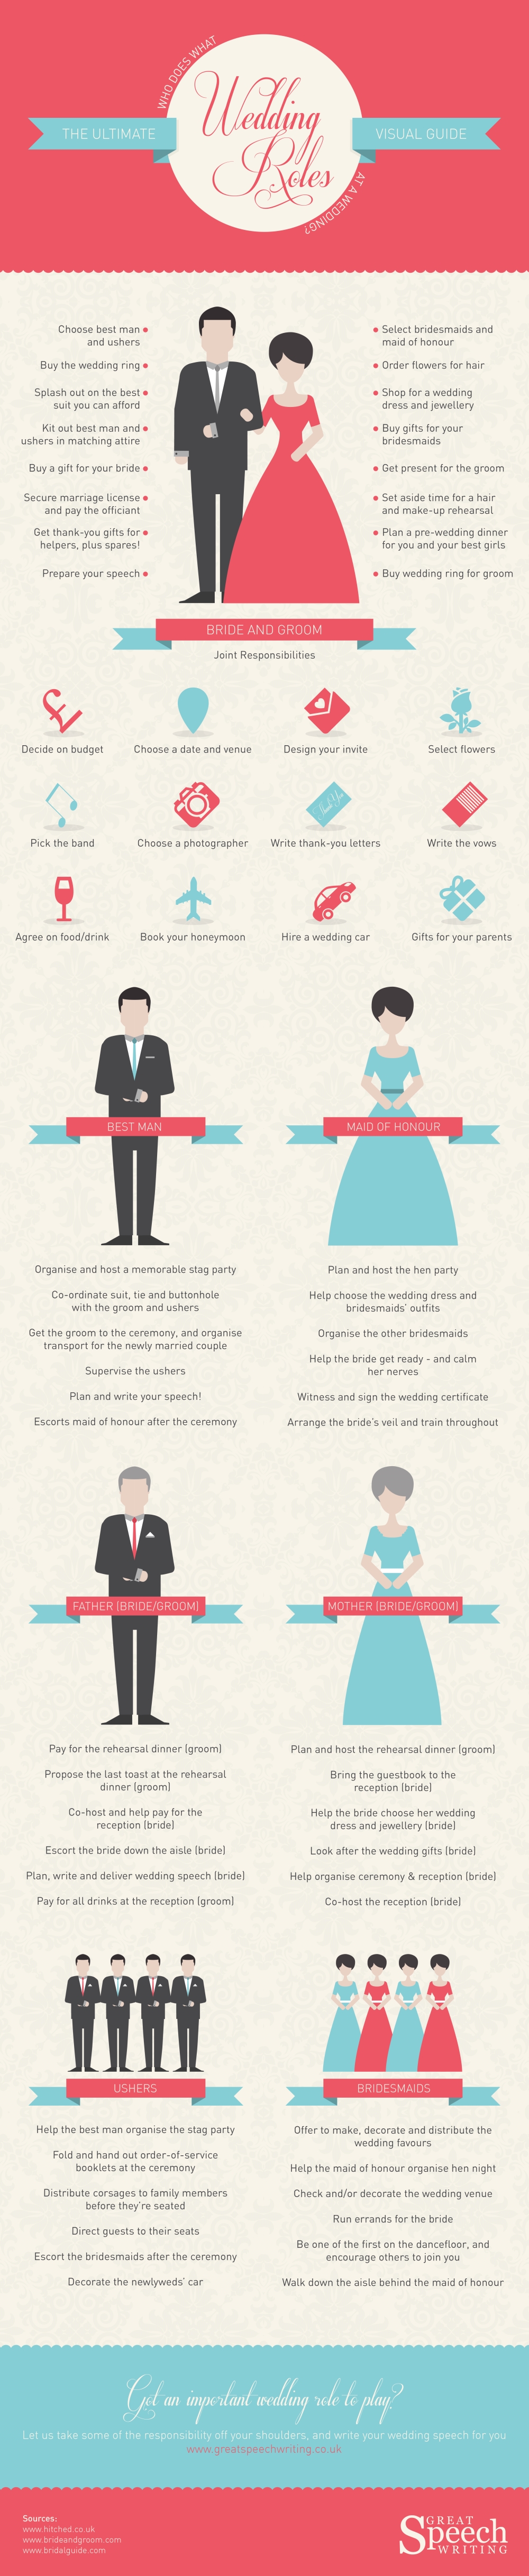 The Ultimate Wedding Roles Visual Guide